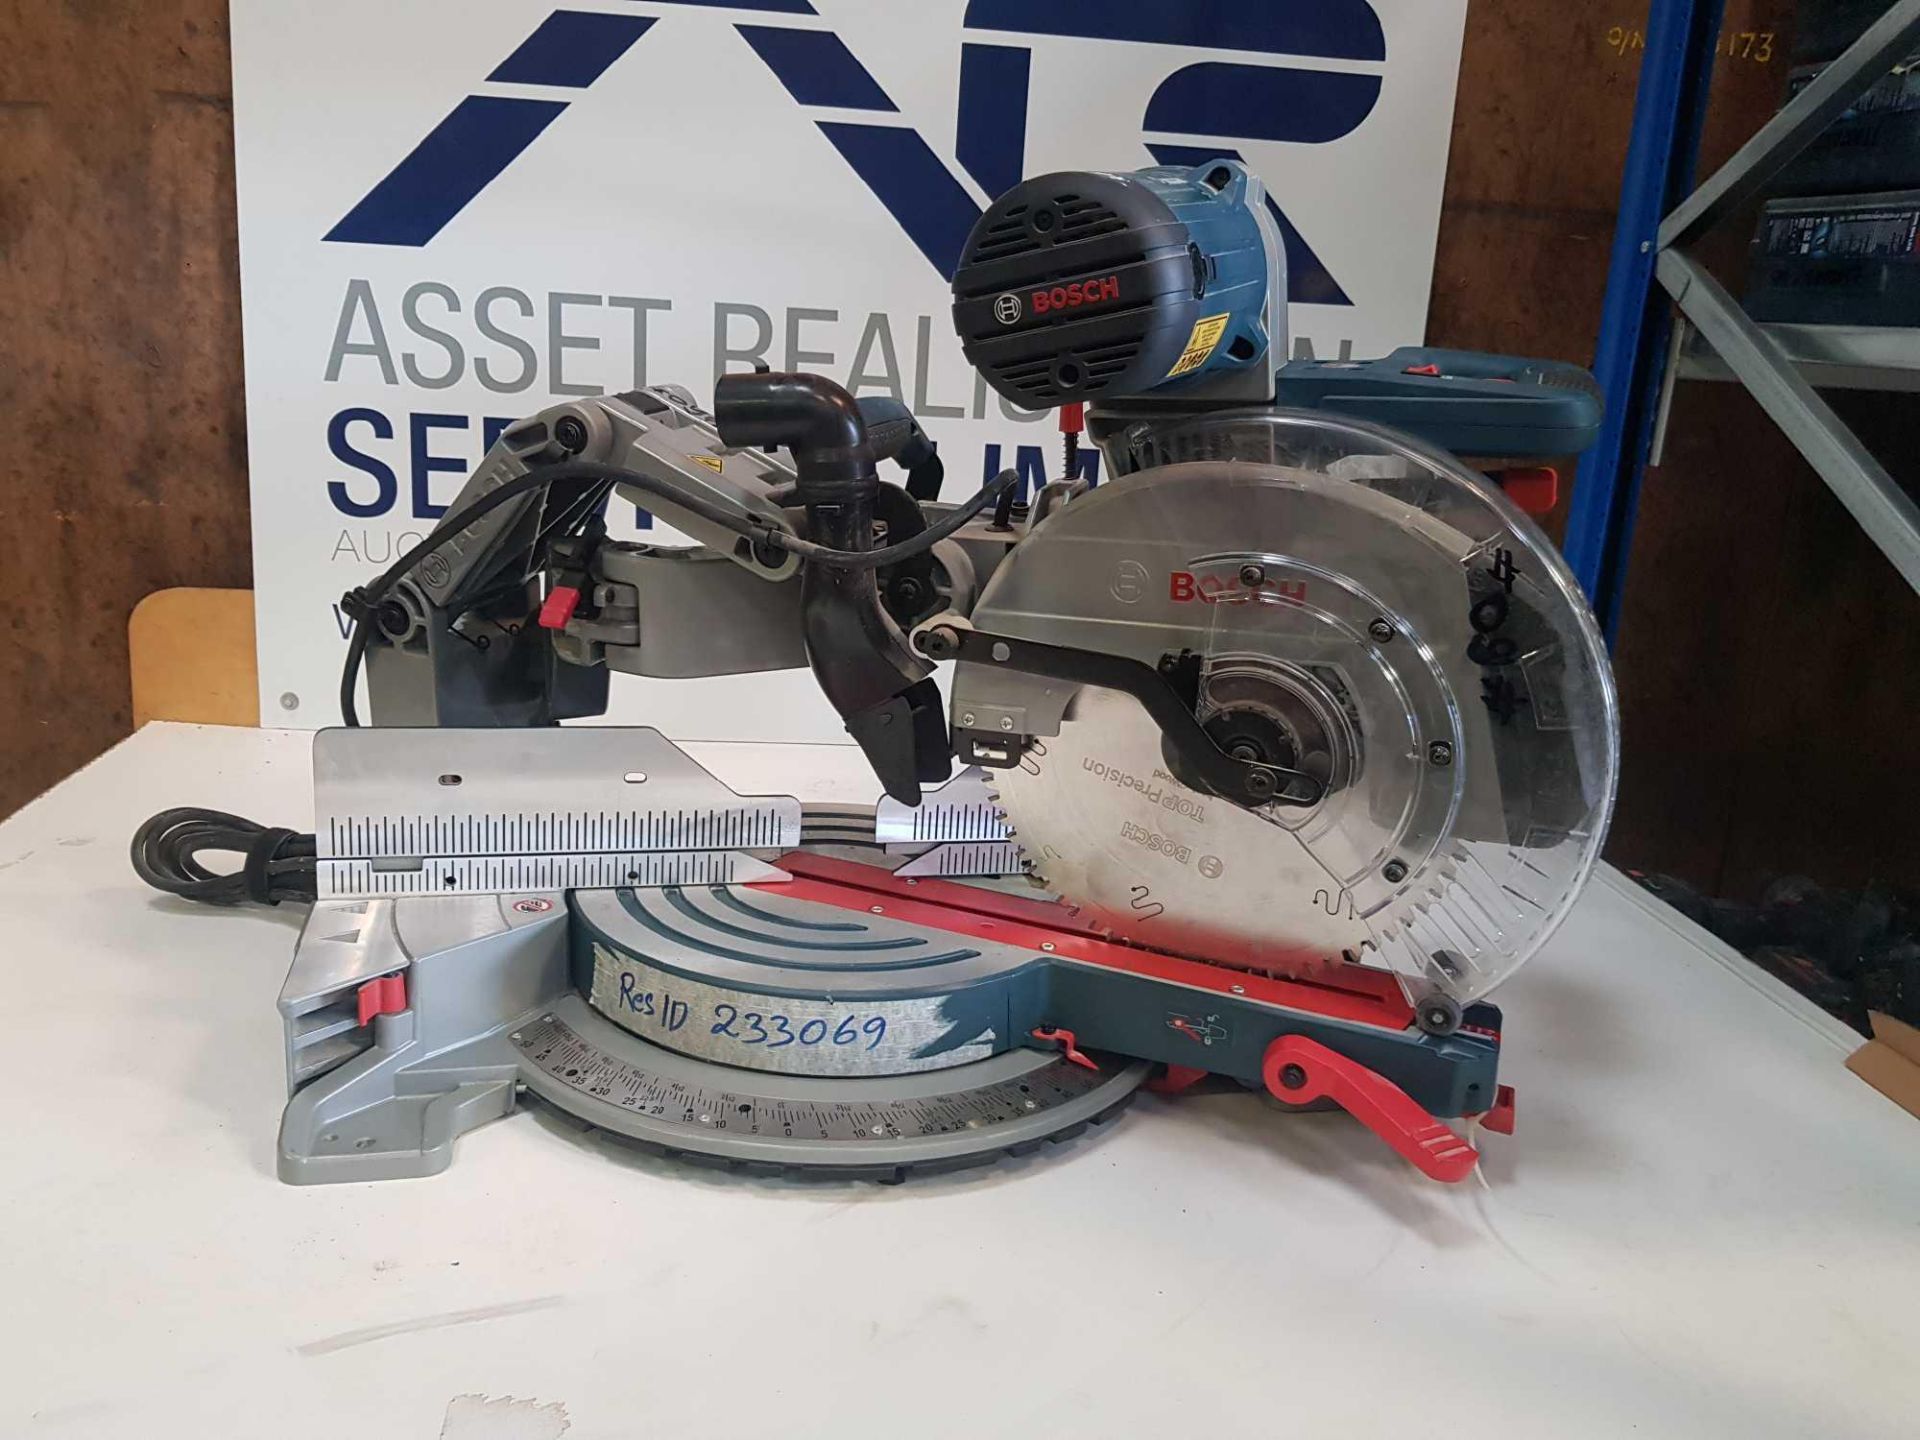 Bosch GCM12 GDL Professional Double Bevel Gliding mitre Saw / Chop Saw 110v As New - Image 3 of 7